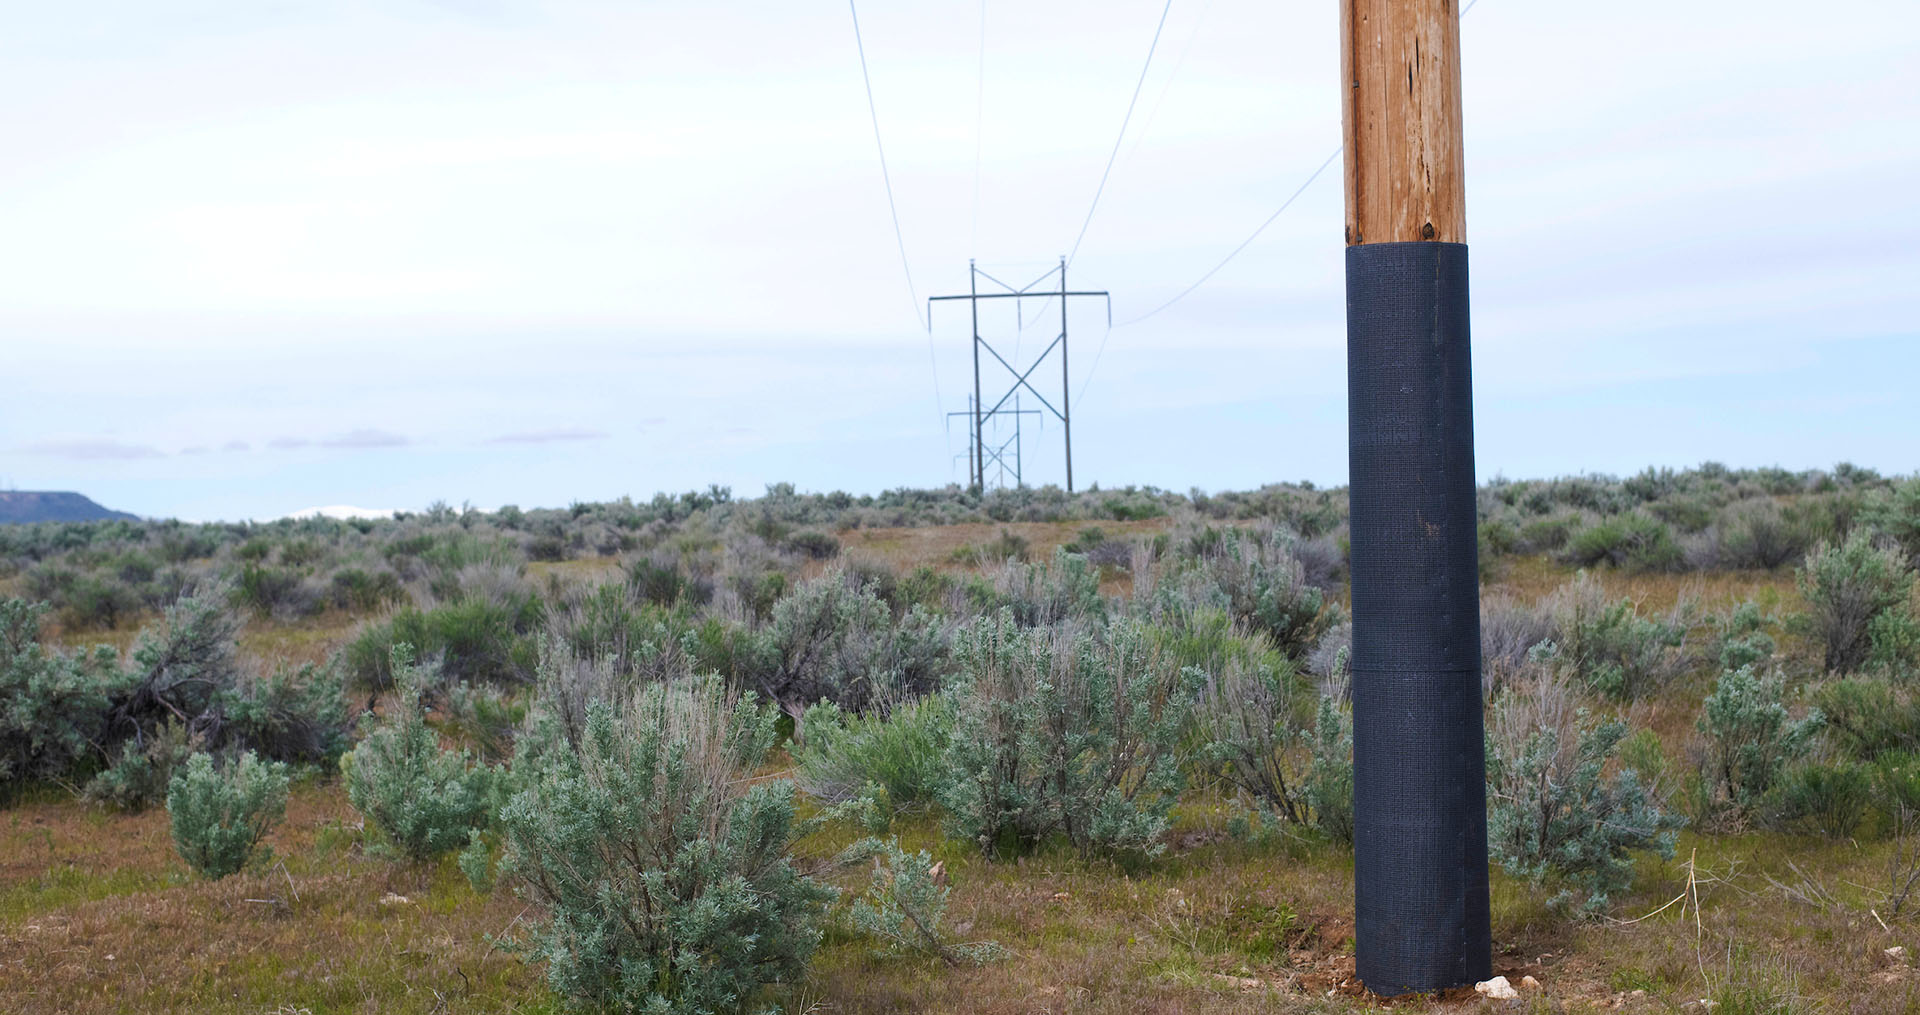 Desert landscape with transmission lines and a close up of a power pole with mesh wrapping